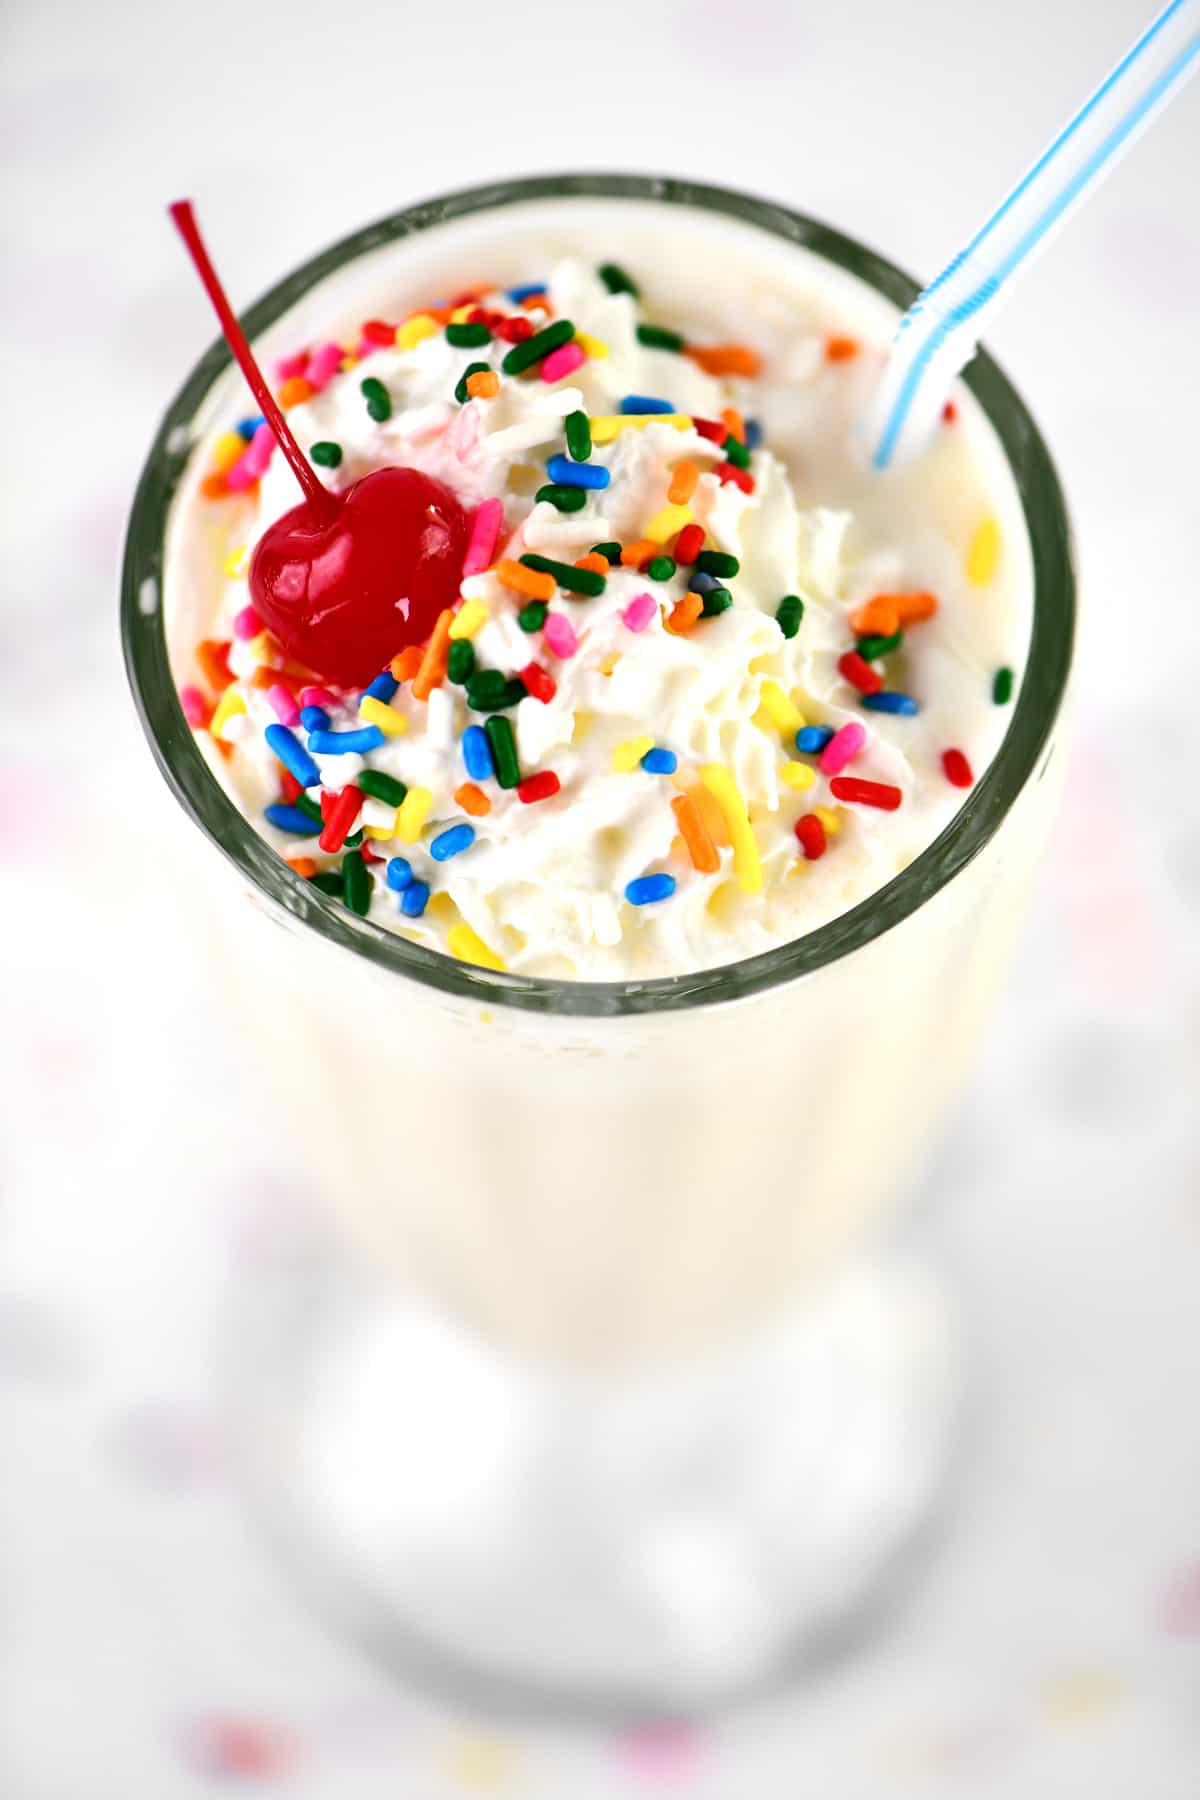 a cherry, sprinkles and whipped topping on a vanilla shake.